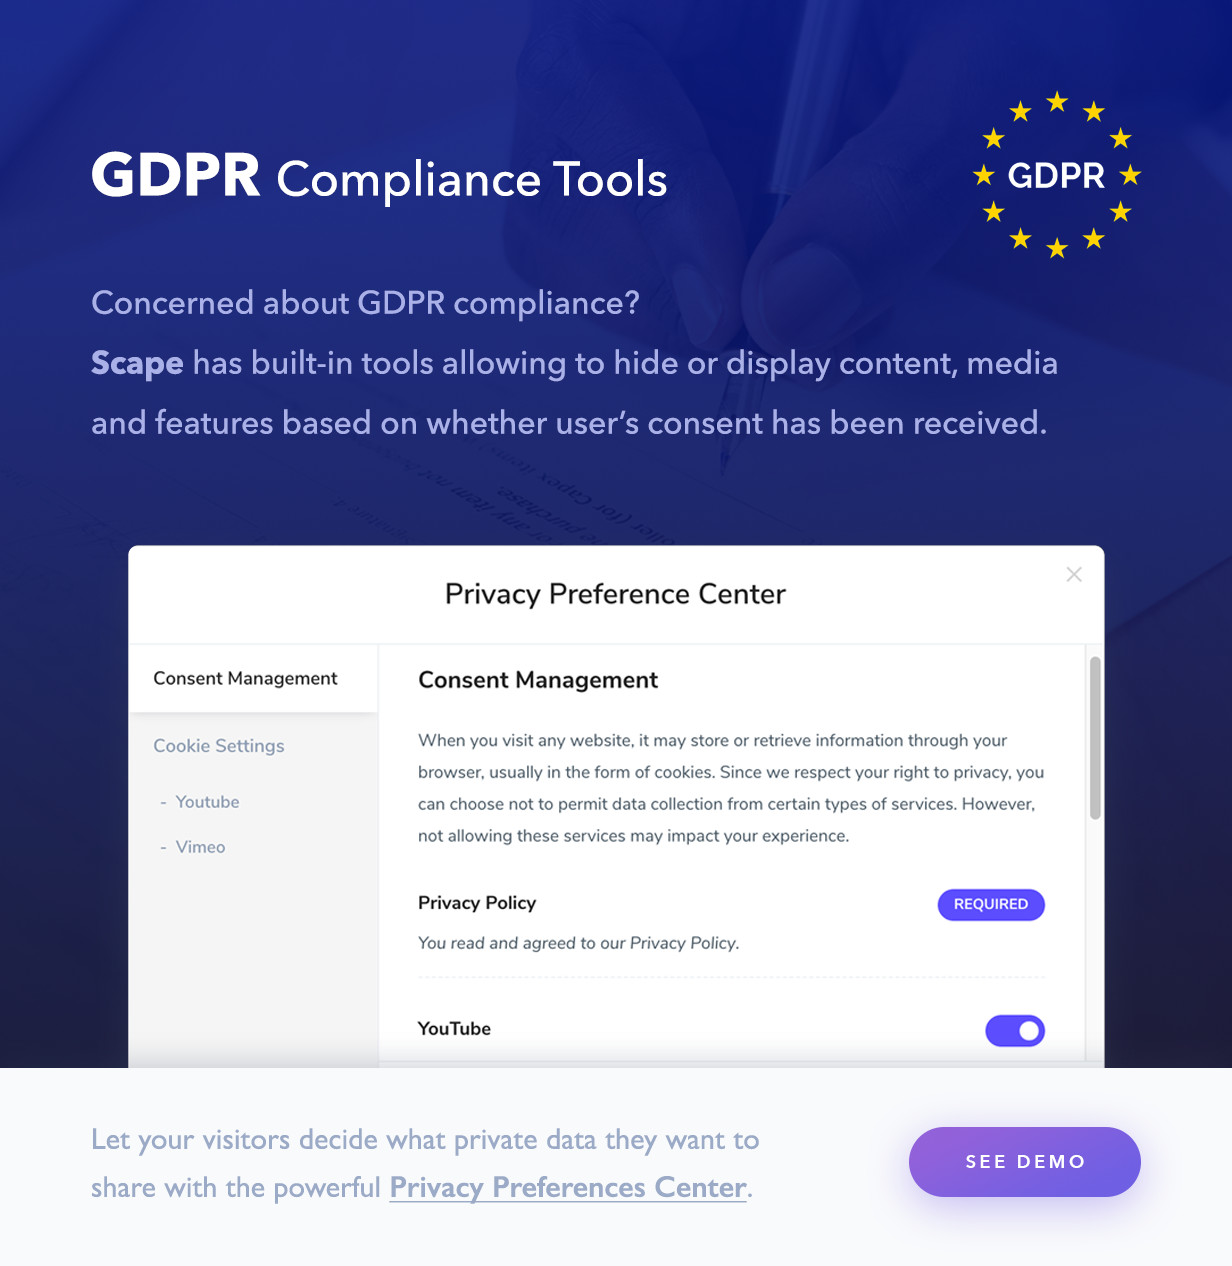 GDPR compliance tools